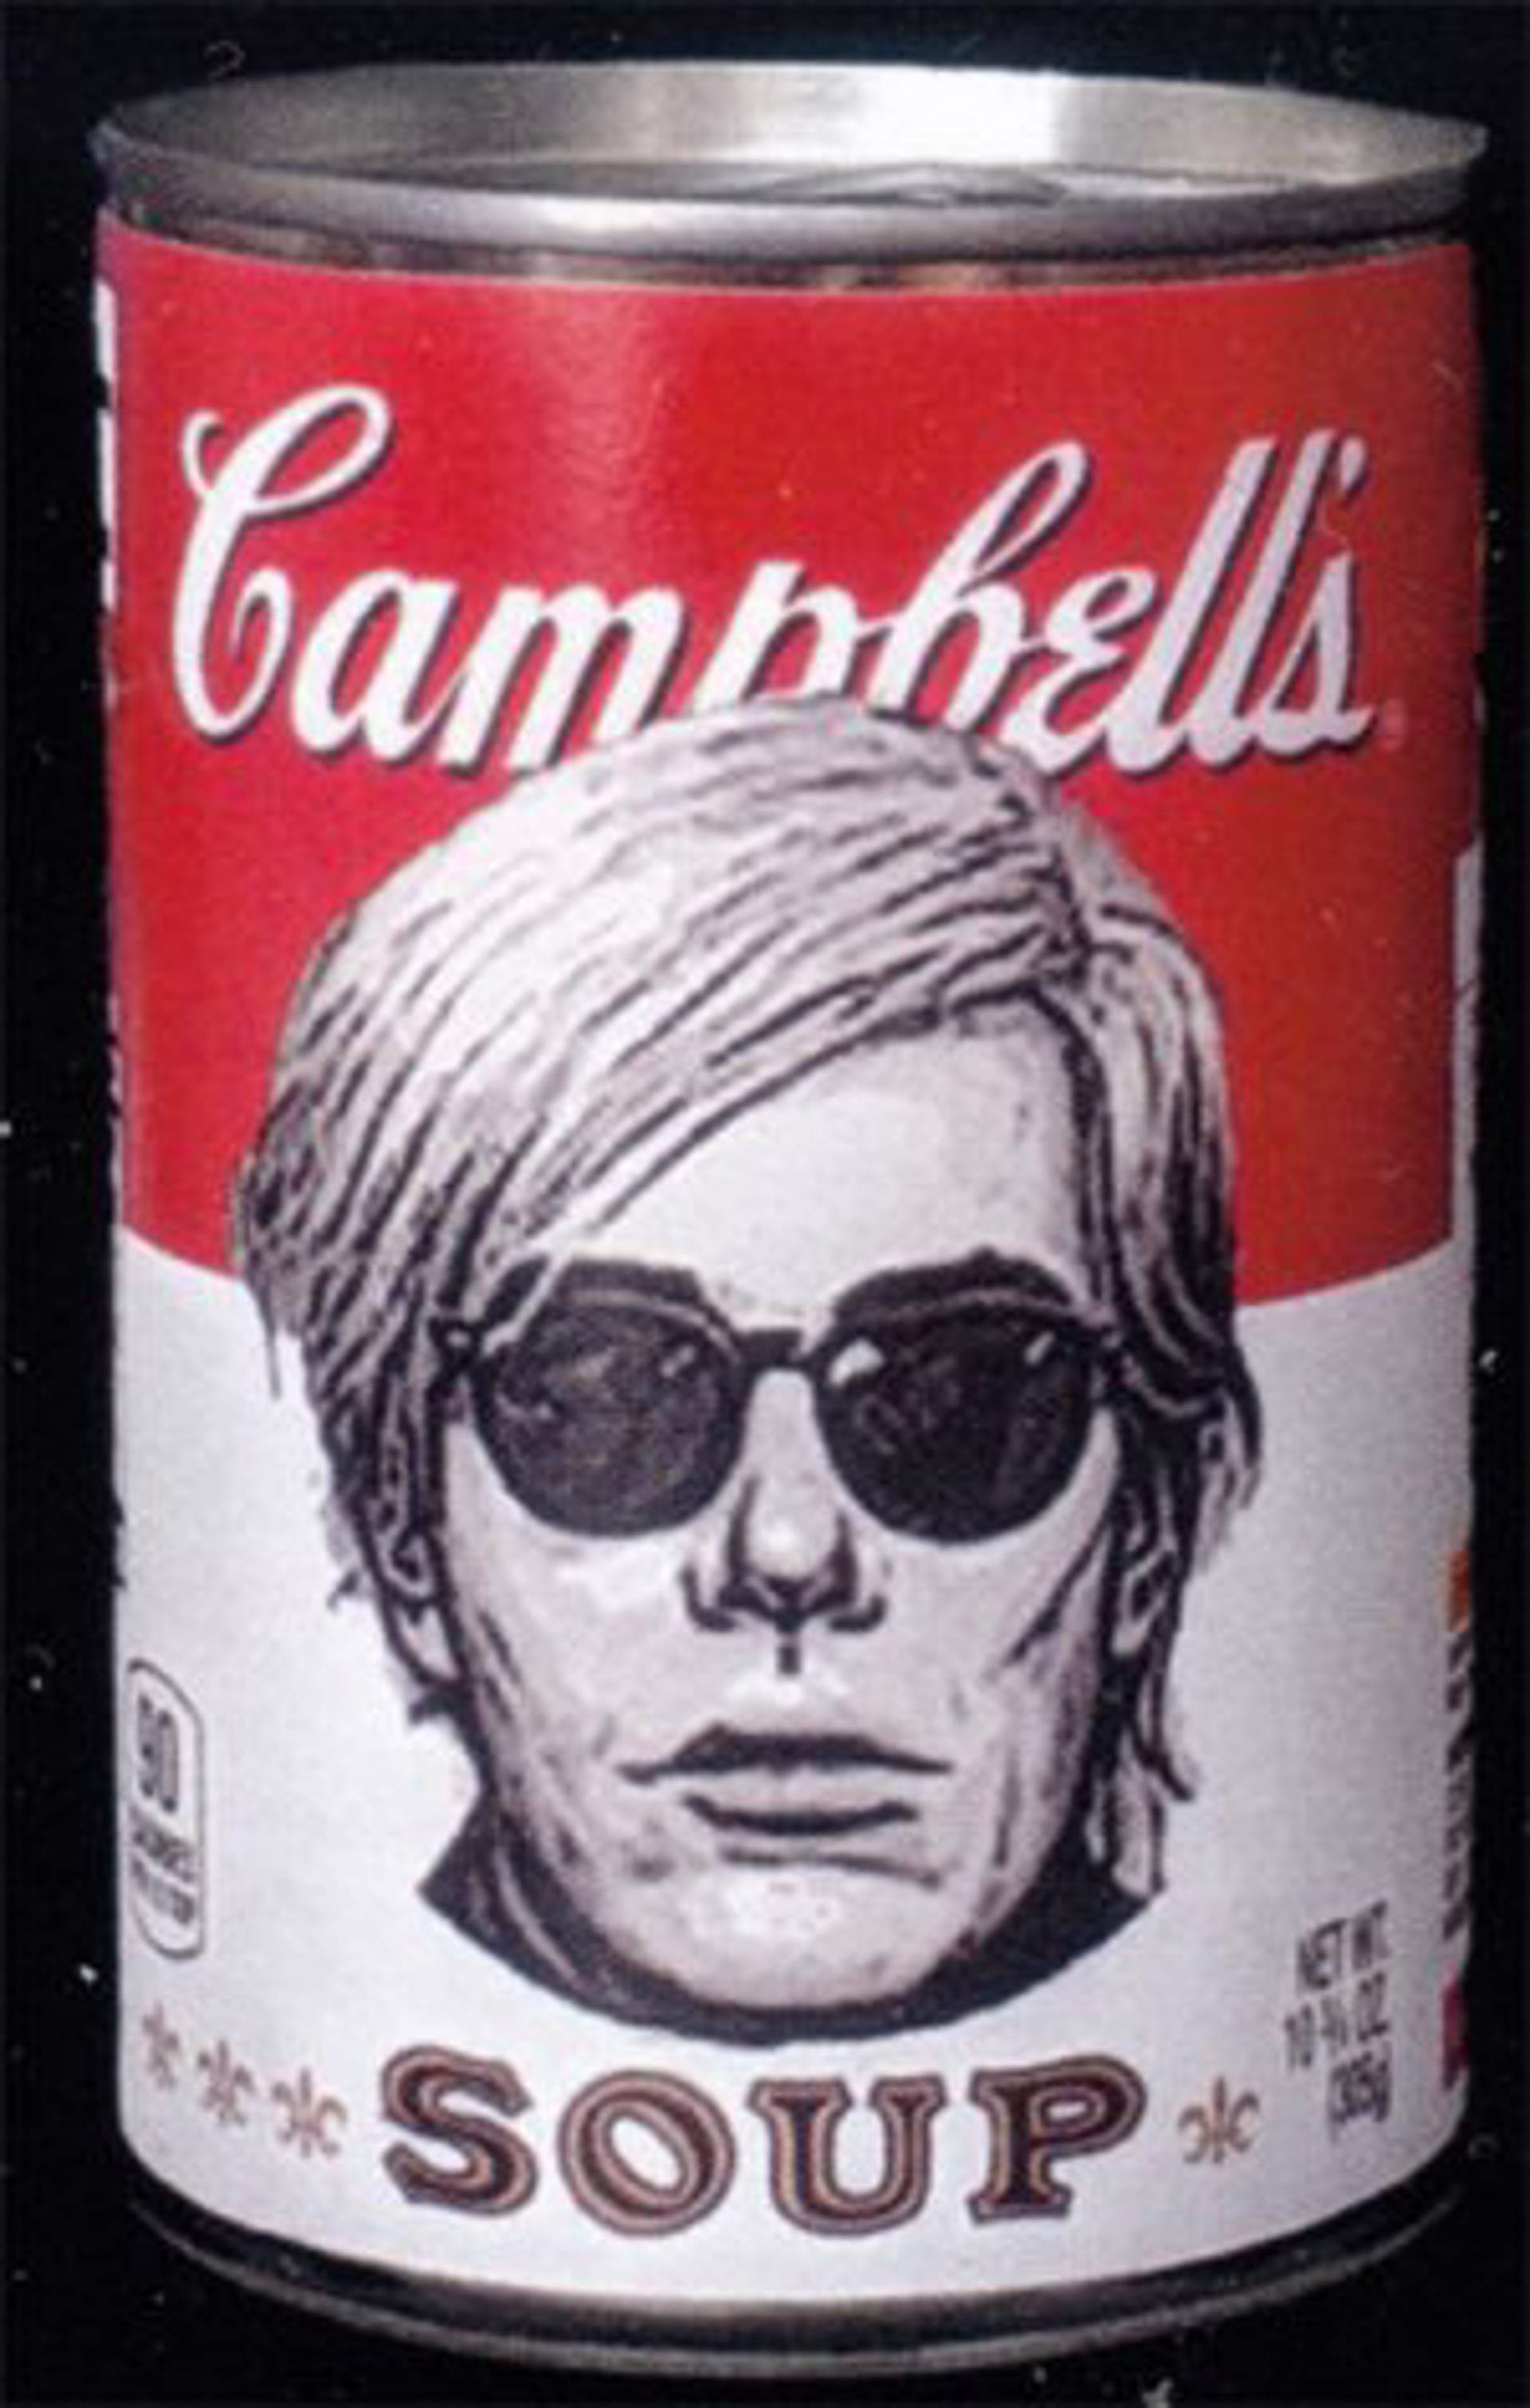 Homage to Andy Warhol by Hillary Kaye